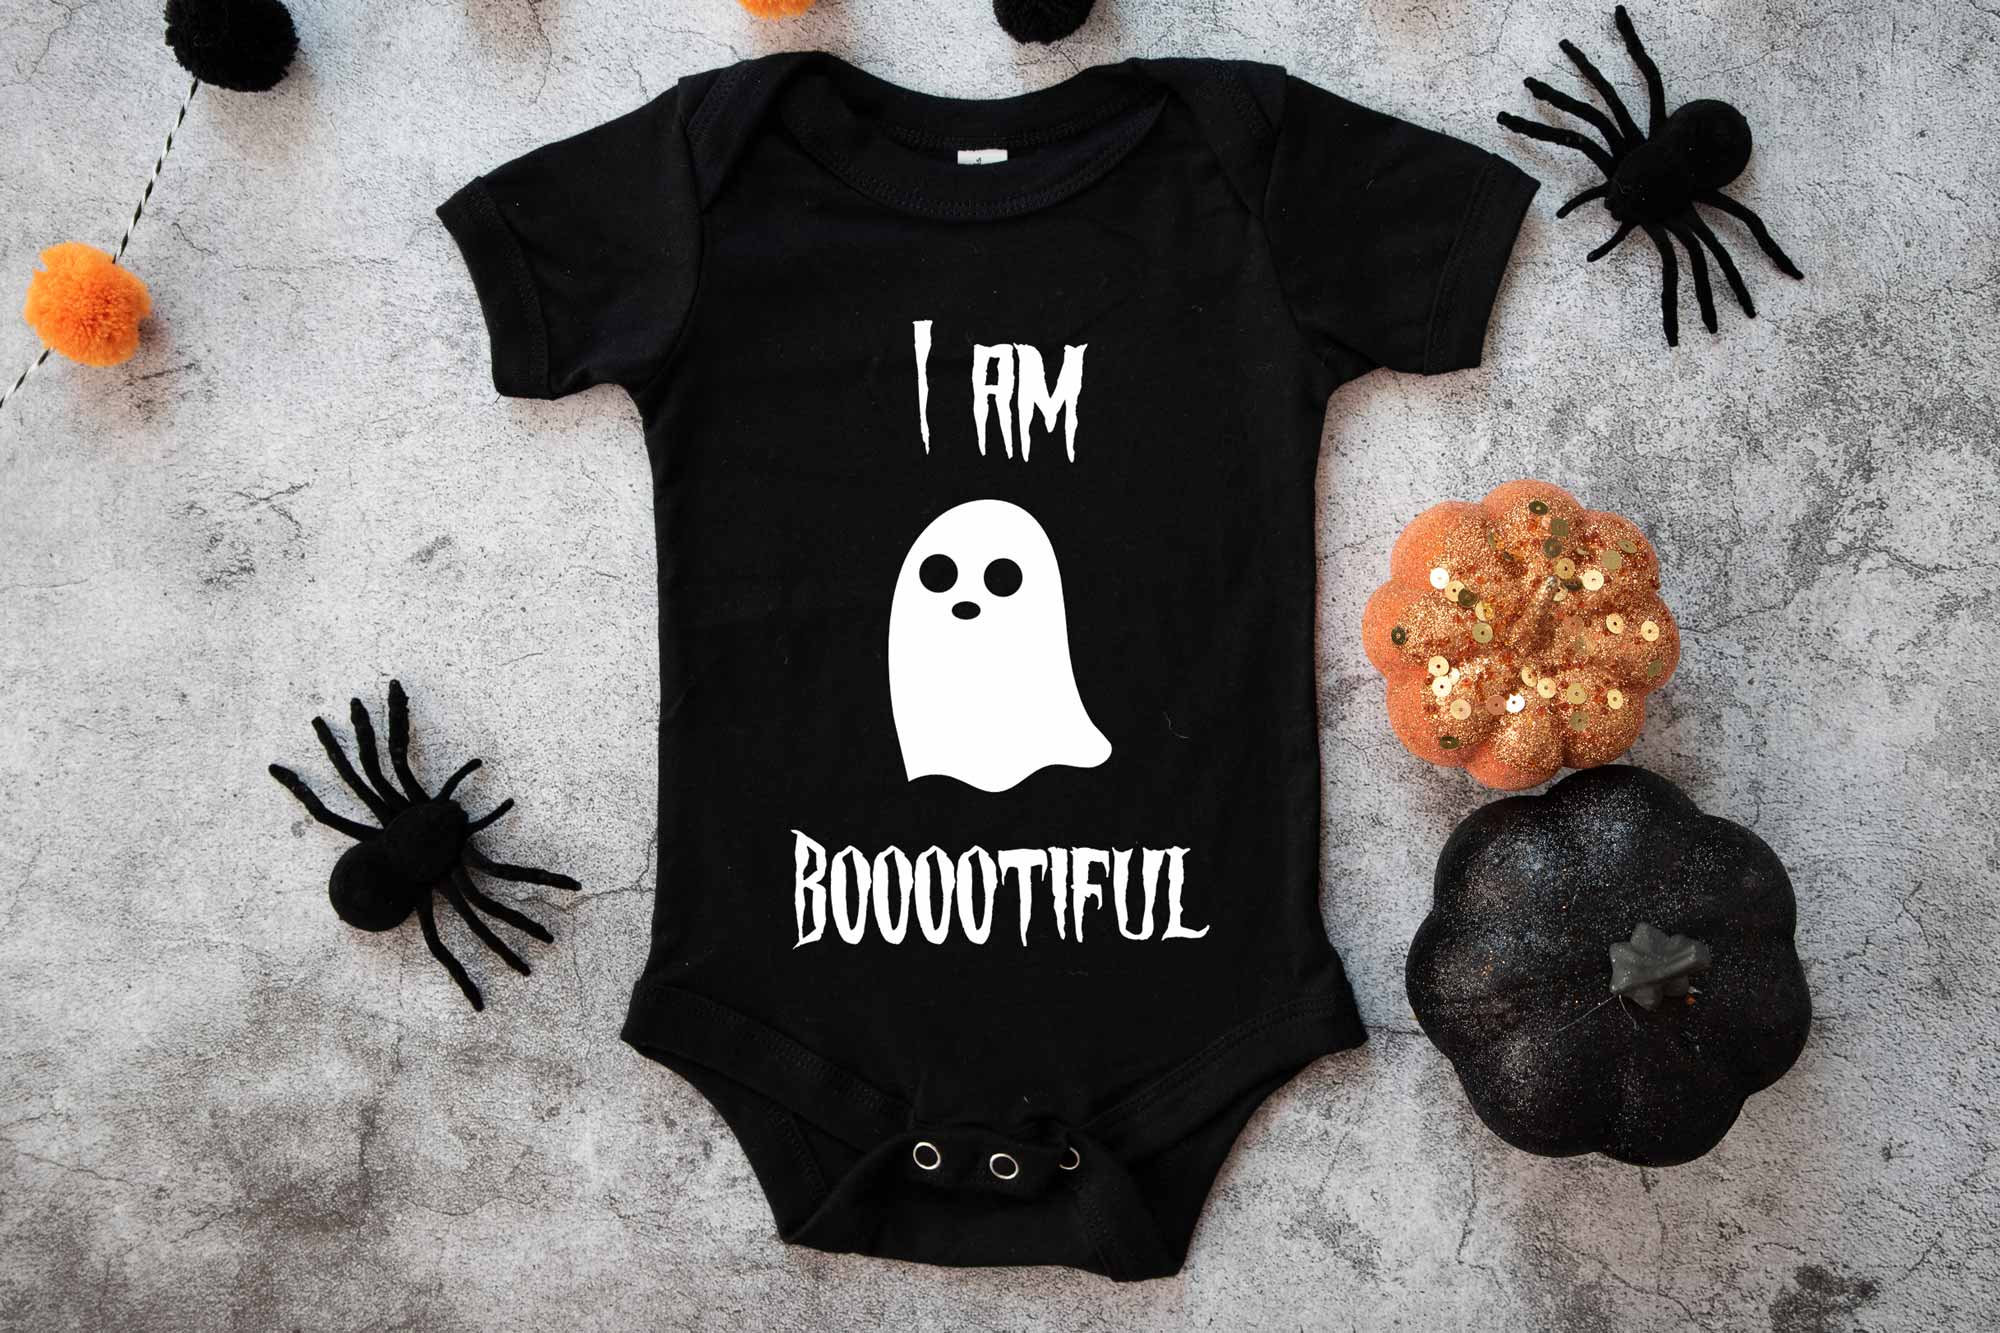 I am bootiful halloween baby onesie on a spooky background